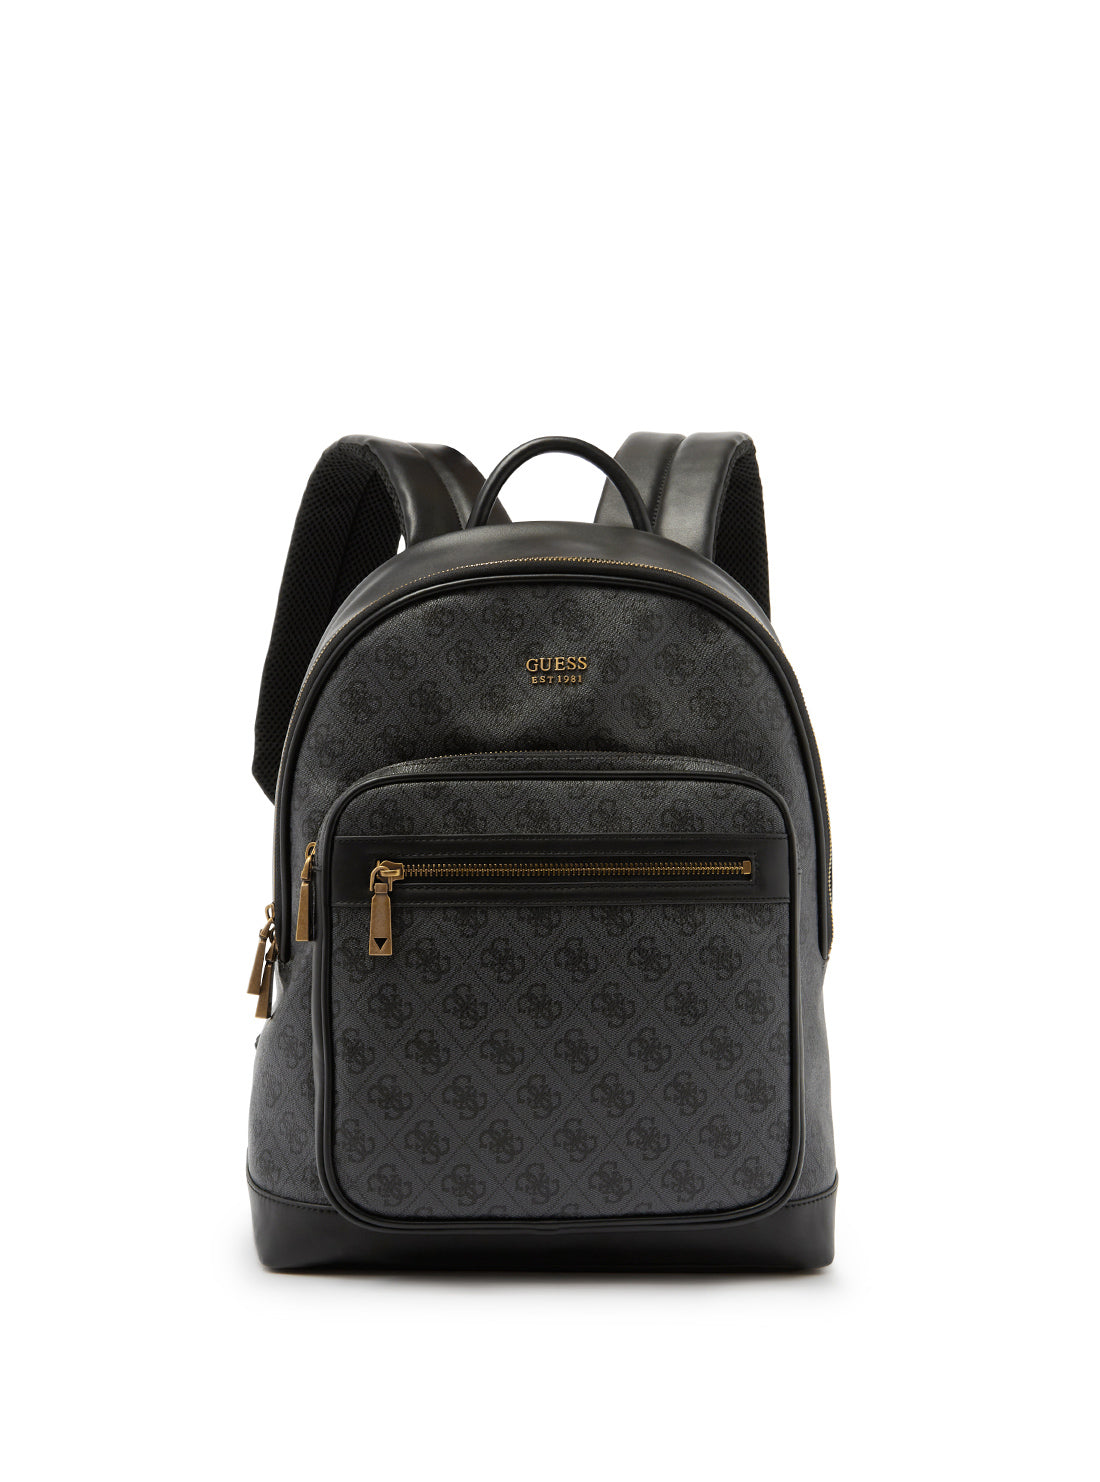 GUESS Men's Coal Logo Keith Backpack SB883998 Front View